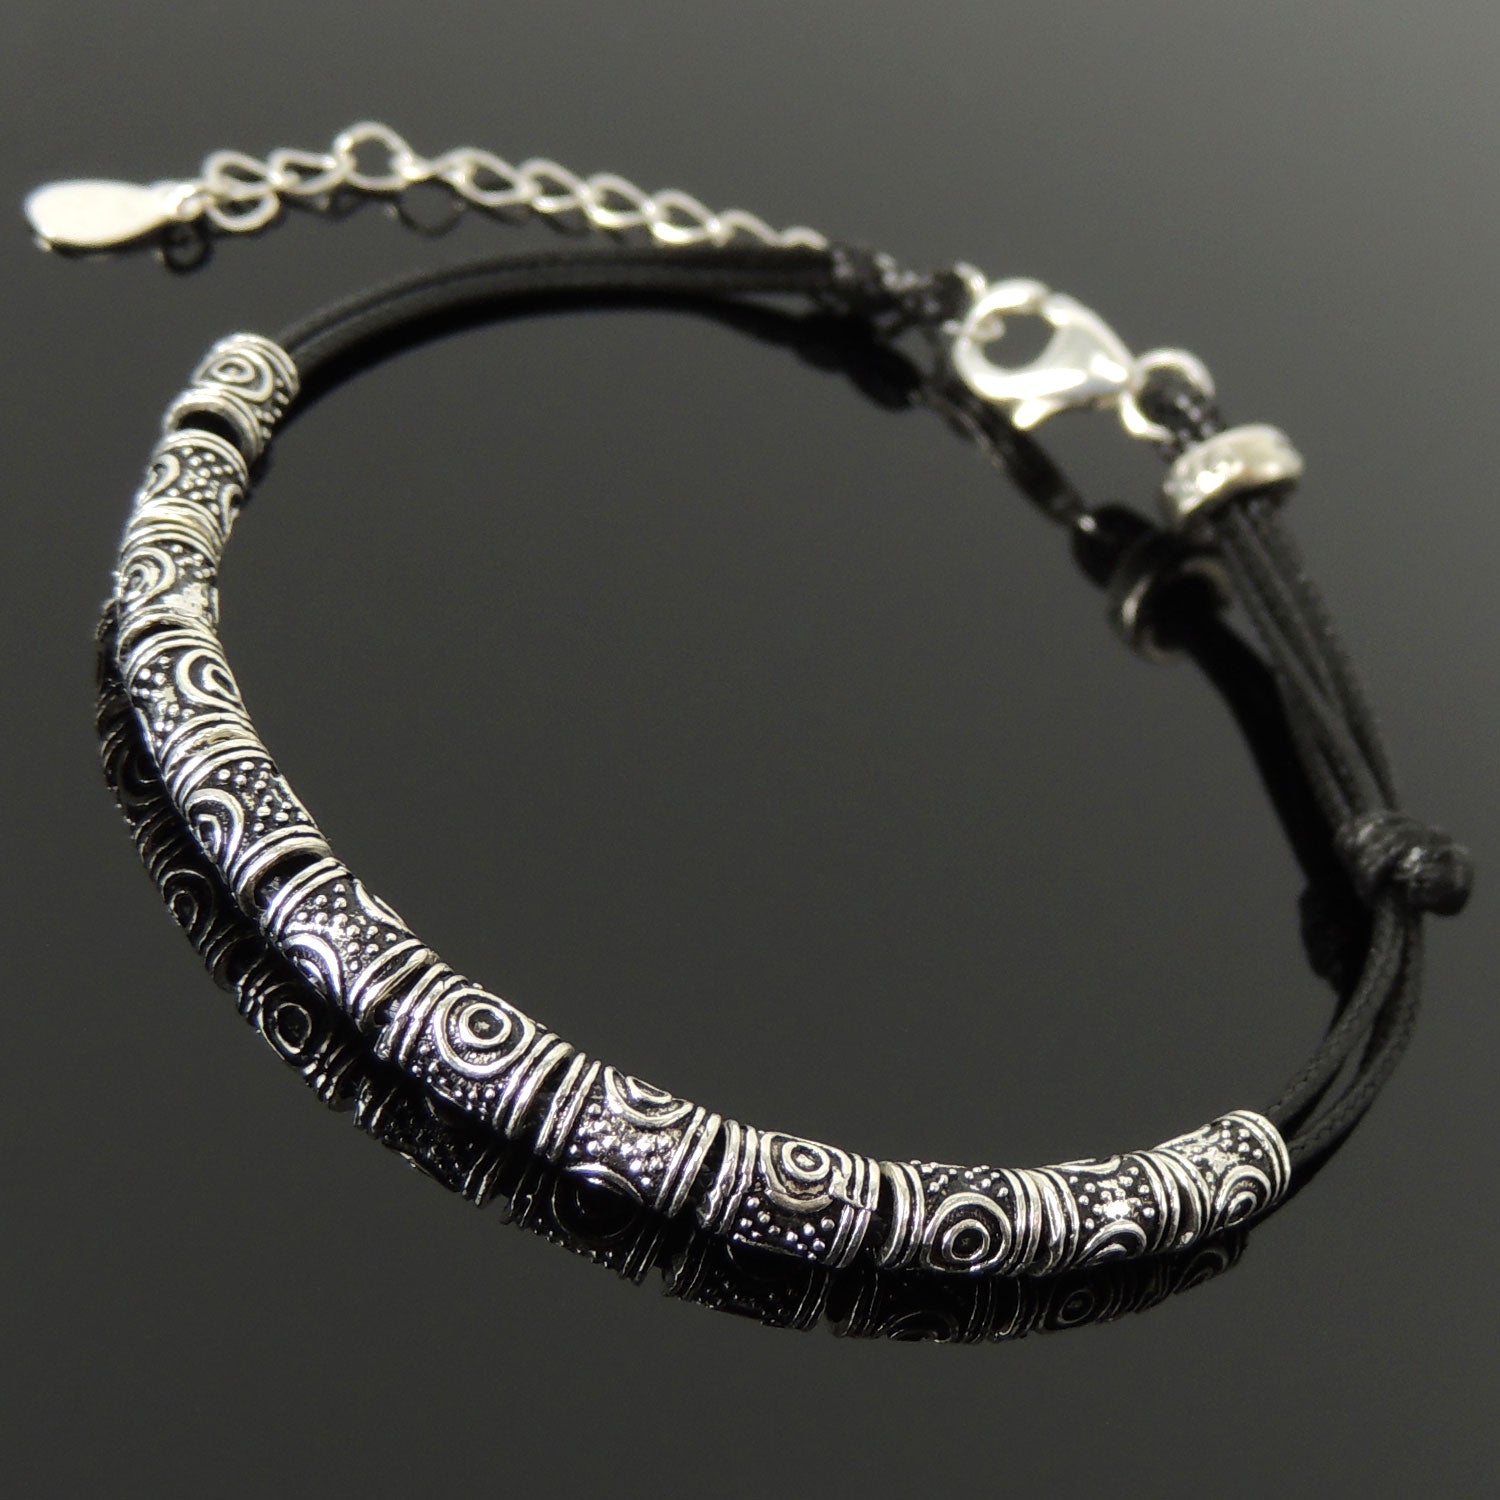 Vintage Celtic Handmade 2-way "Duo" Adjustable Bracelet - Men's Women's Custom Design, Casual Wear with Small Black Wax Rope, Genuine S925 Sterling Silver Clasp, Chain & Link BR1778